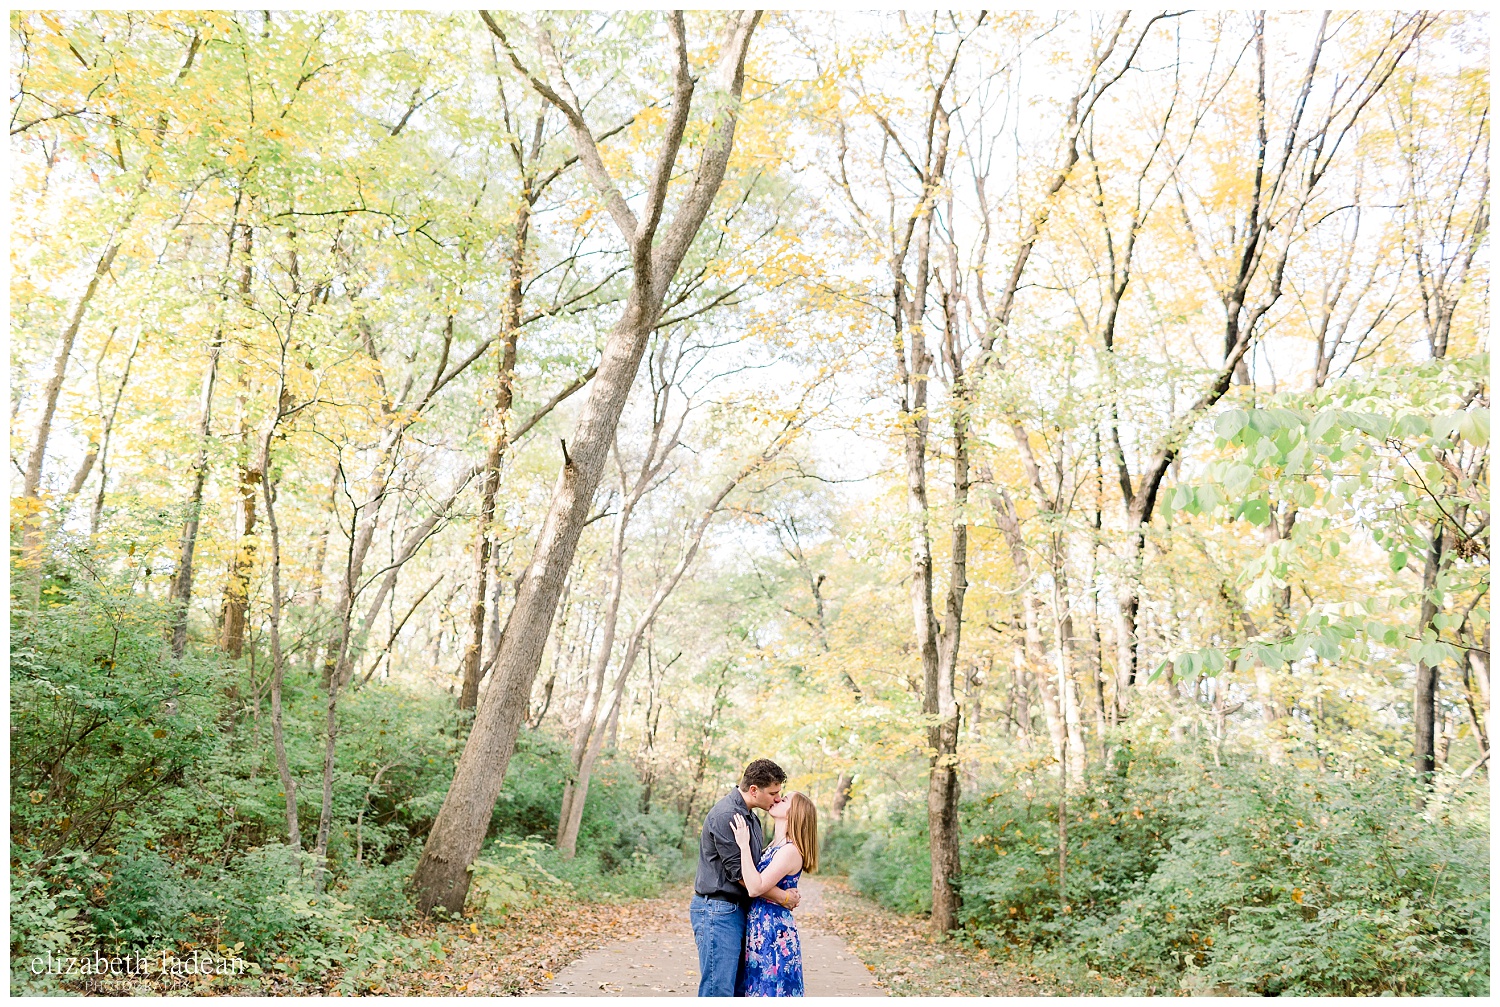 Northland-KC-Fall-Engagement-Photos-with-dog-A+B-2018-elizabeth-ladean-photography-photo_1479.jpg